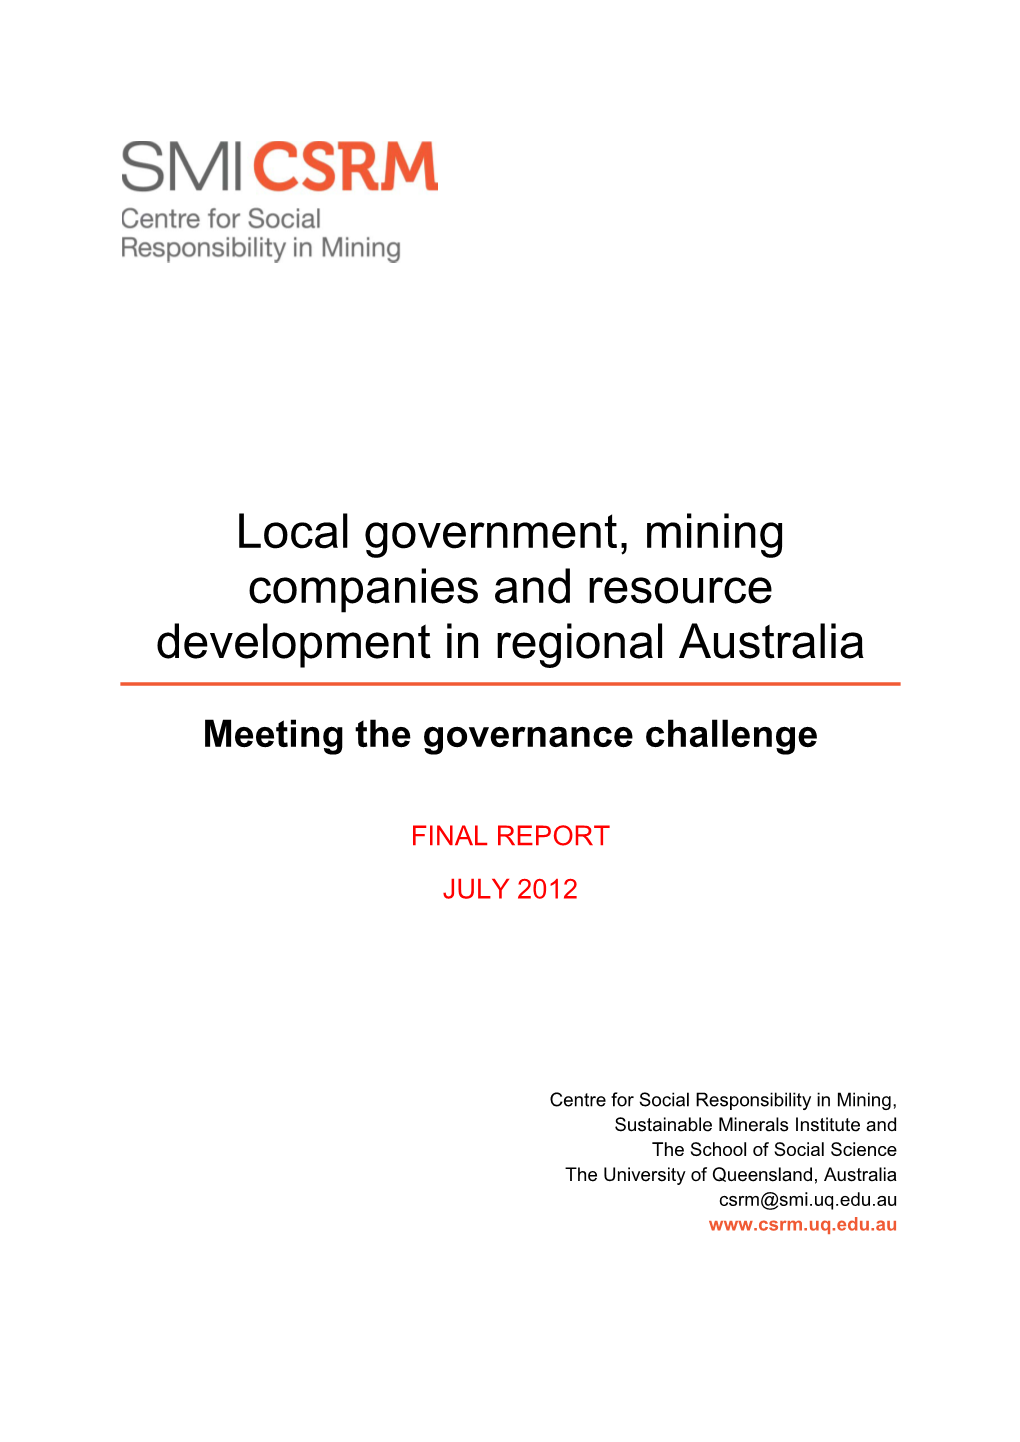 Local Government, Mining Companies and Resource Development in Regional Australia